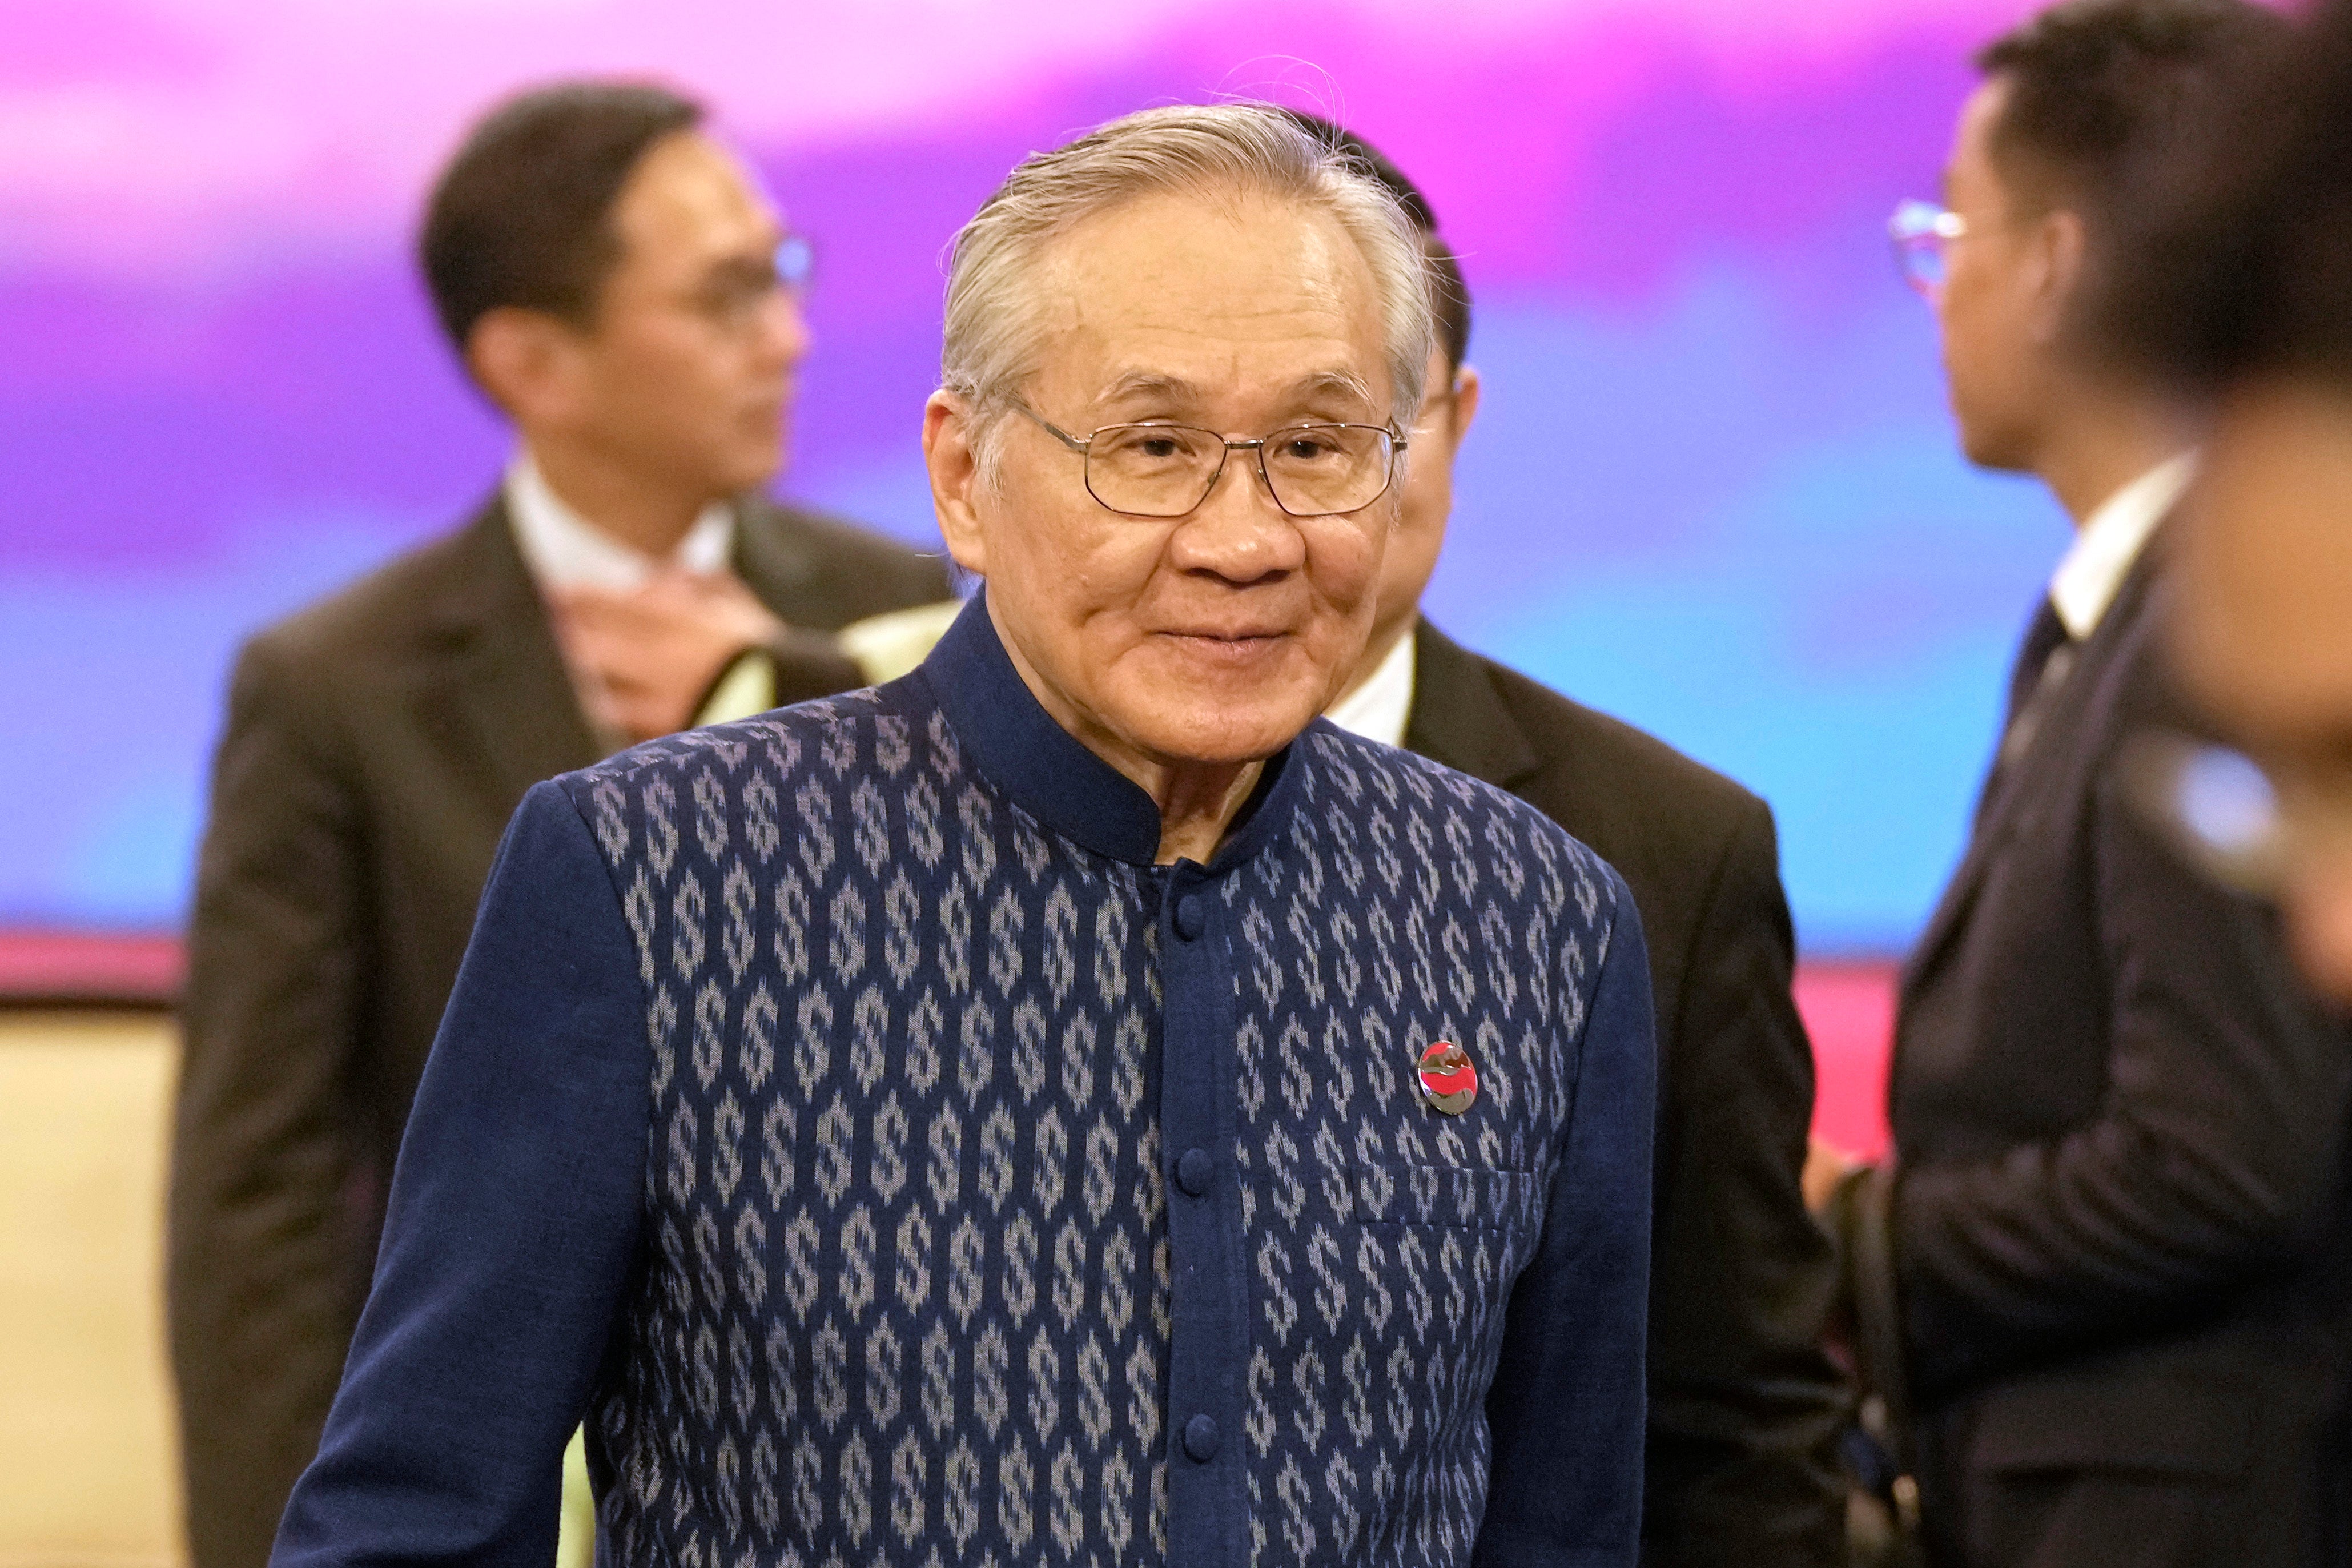 Thailand’s foreign minister Don Pramudwinai at the Asean foreign ministers’ meeting in Jakarta, Indonesia